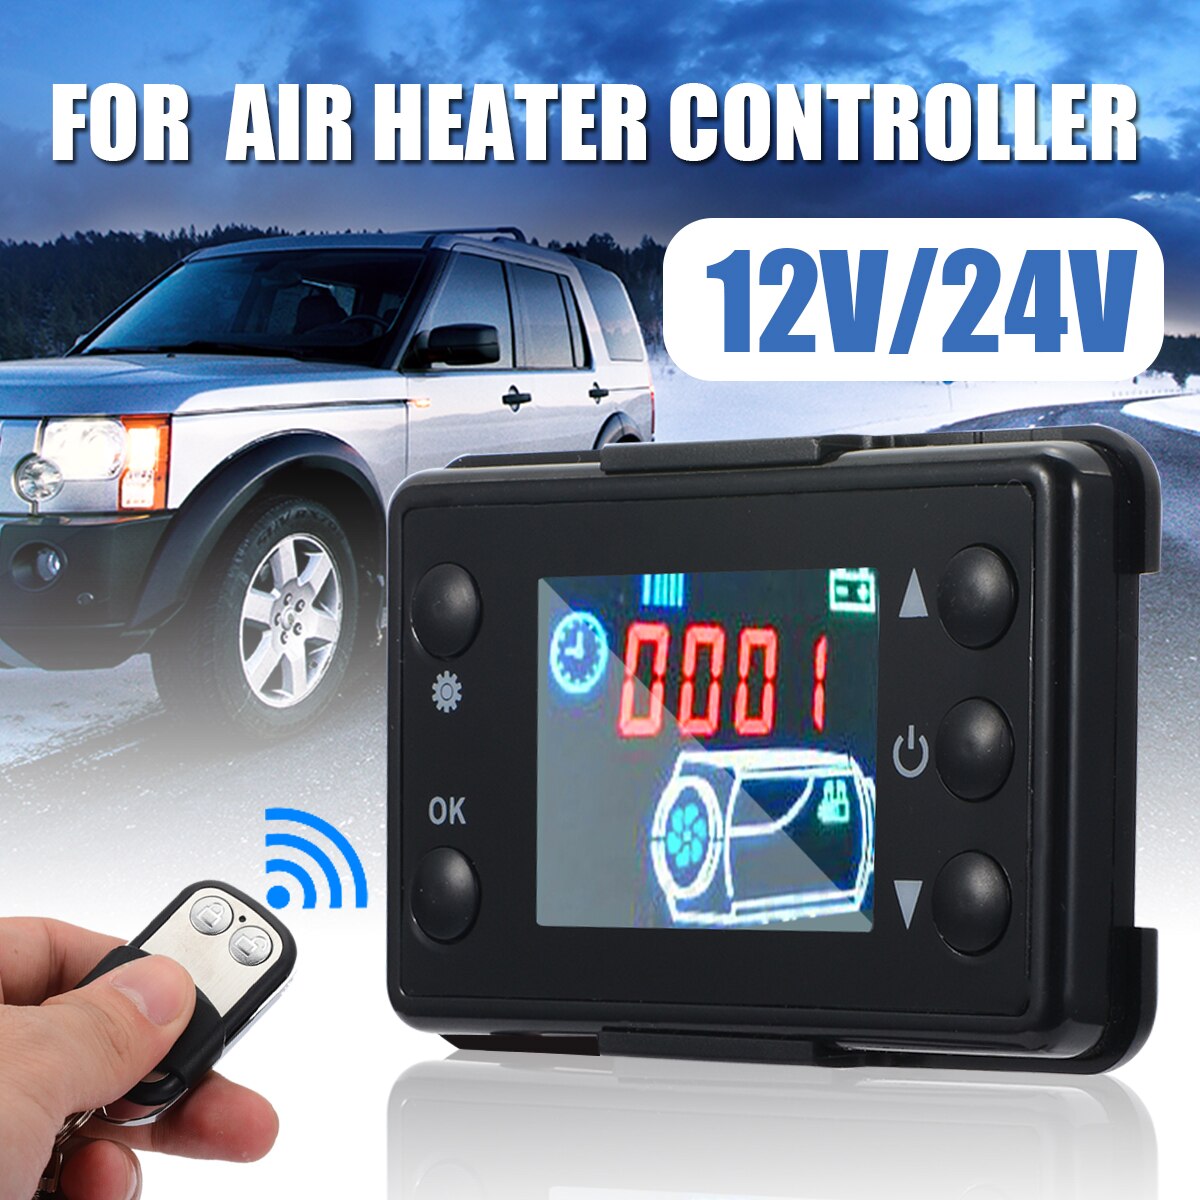 12V/24V Universele Auto Air Heater Lcd Monitor Switch + Afstandsbediening Controller Voertuig Parkeer Heater accessoires